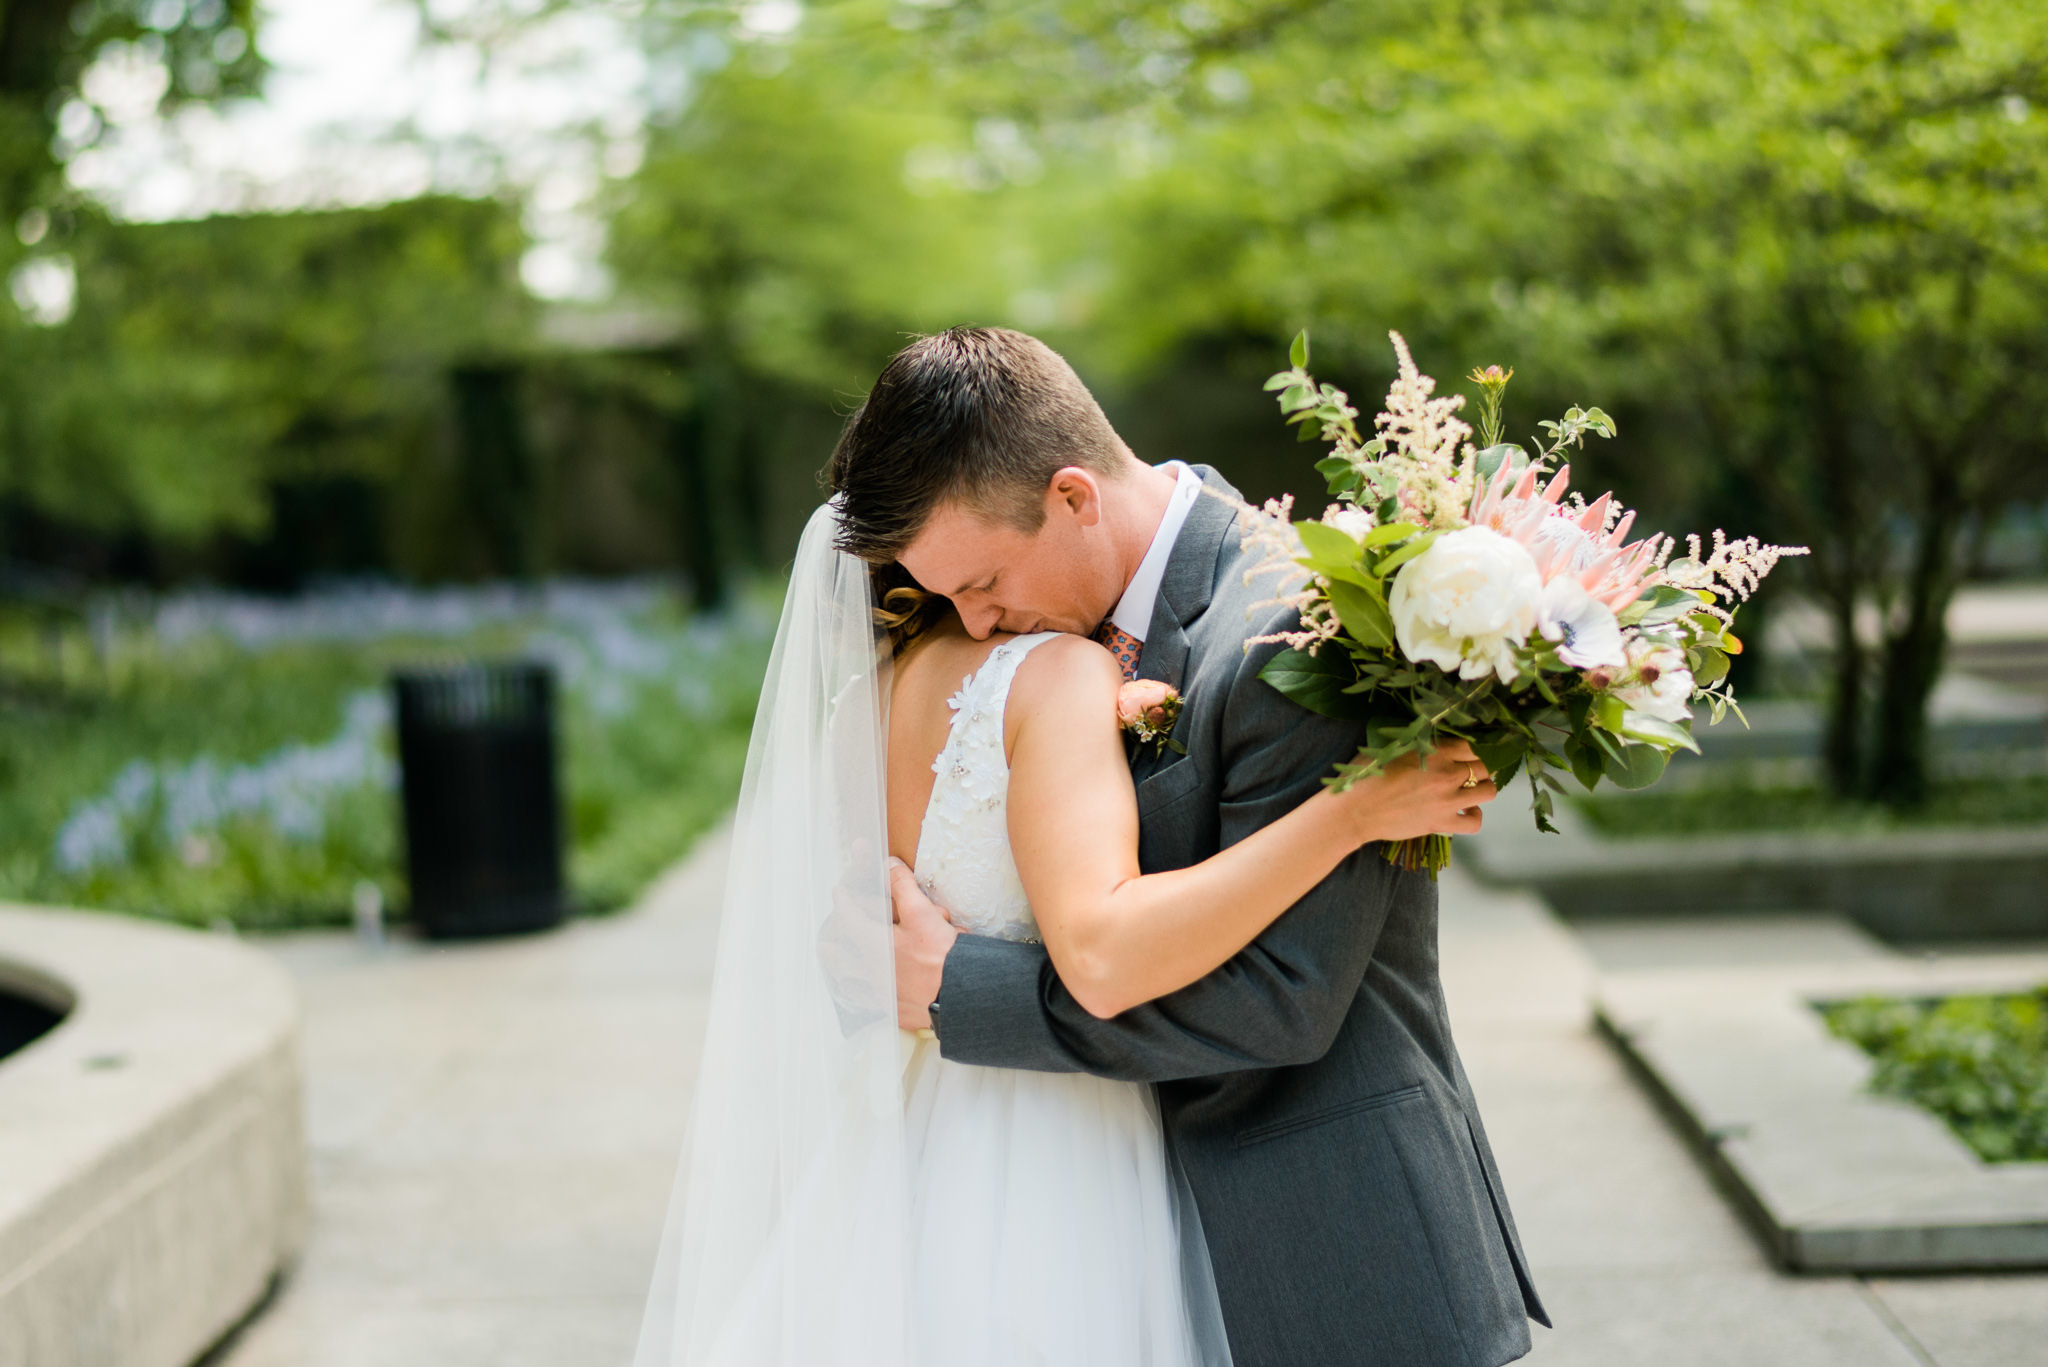 Bride and groom hug in South Garden at the Art Institute of Chicago for spring wedding at River Roast, with bouquet of protea, peonies, and astilbe.